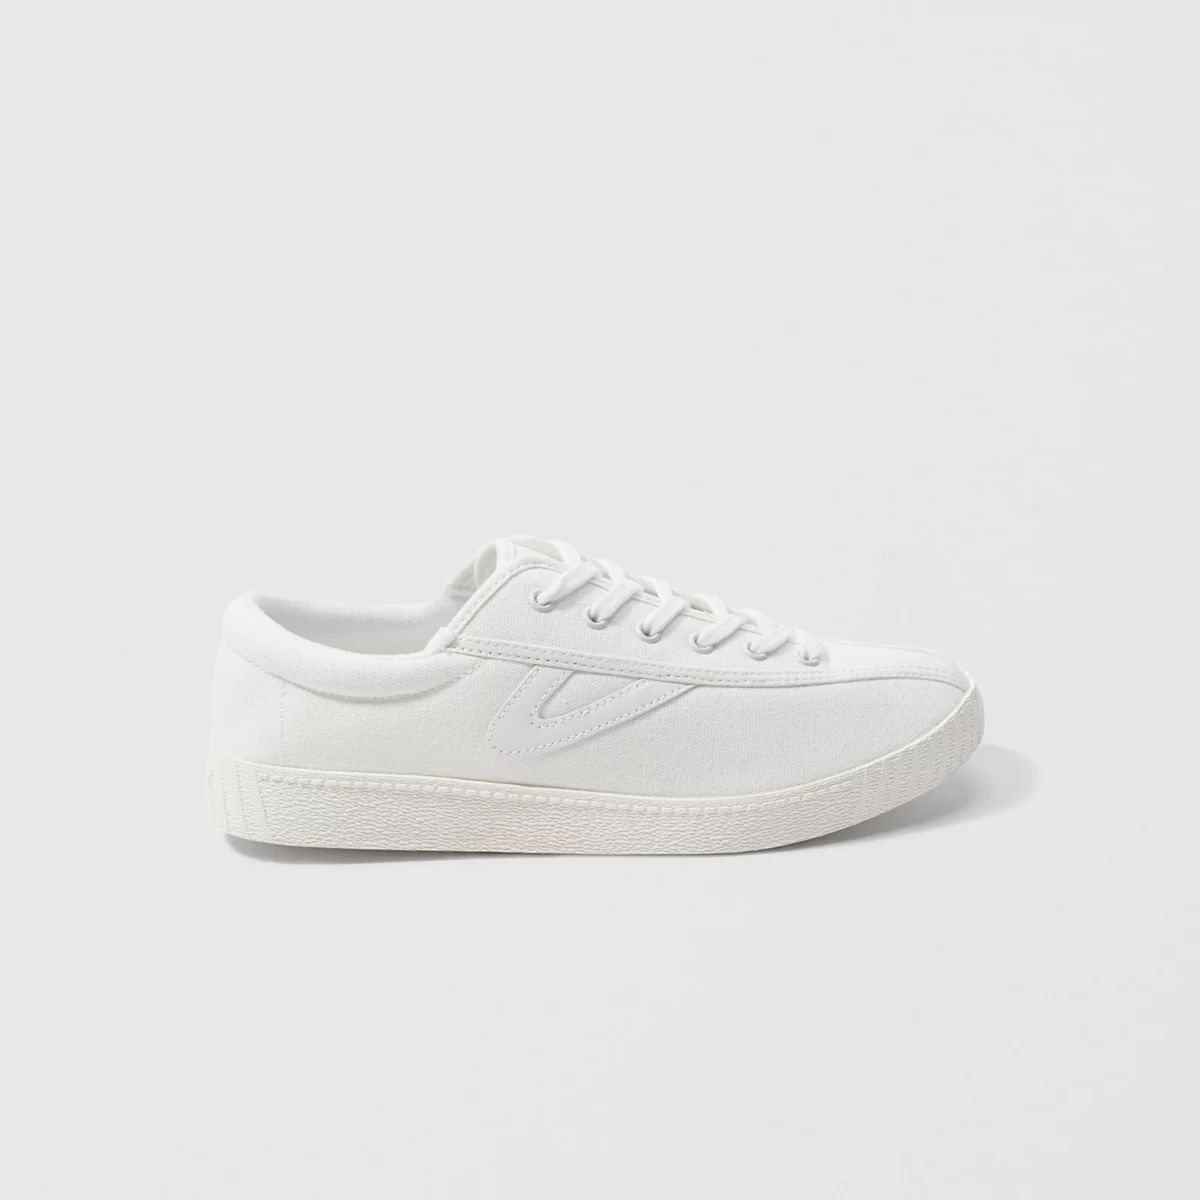 Tretorn Nylite Sneakers | Abercrombie & Fitch US & UK